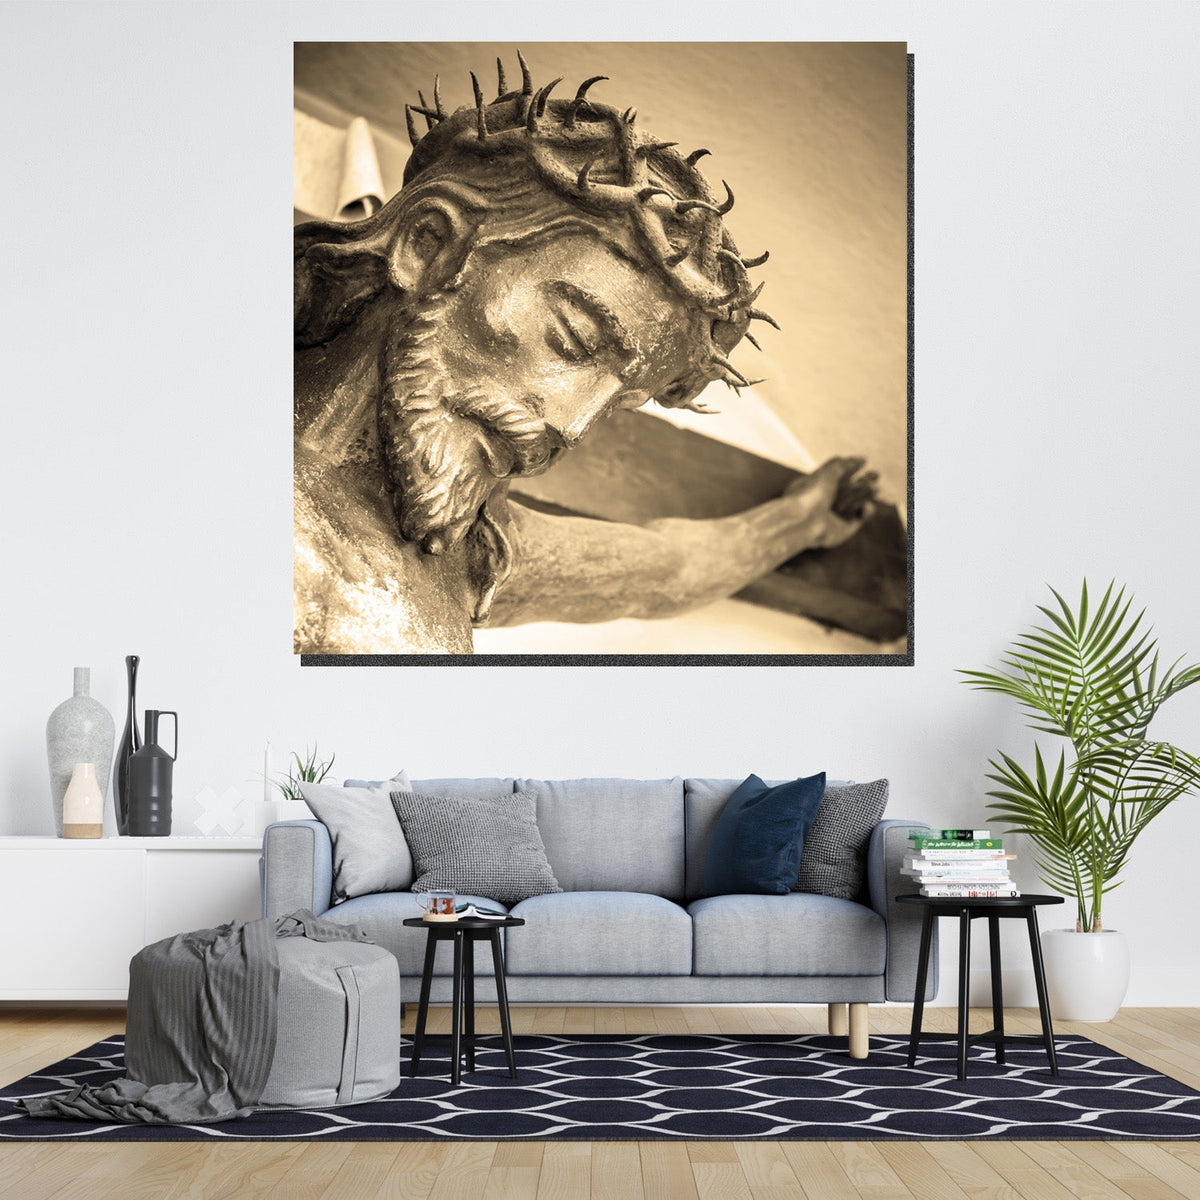 https://cdn.shopify.com/s/files/1/0387/9986/8044/products/StatueofChristCanvasArtprintStretched-2.jpg